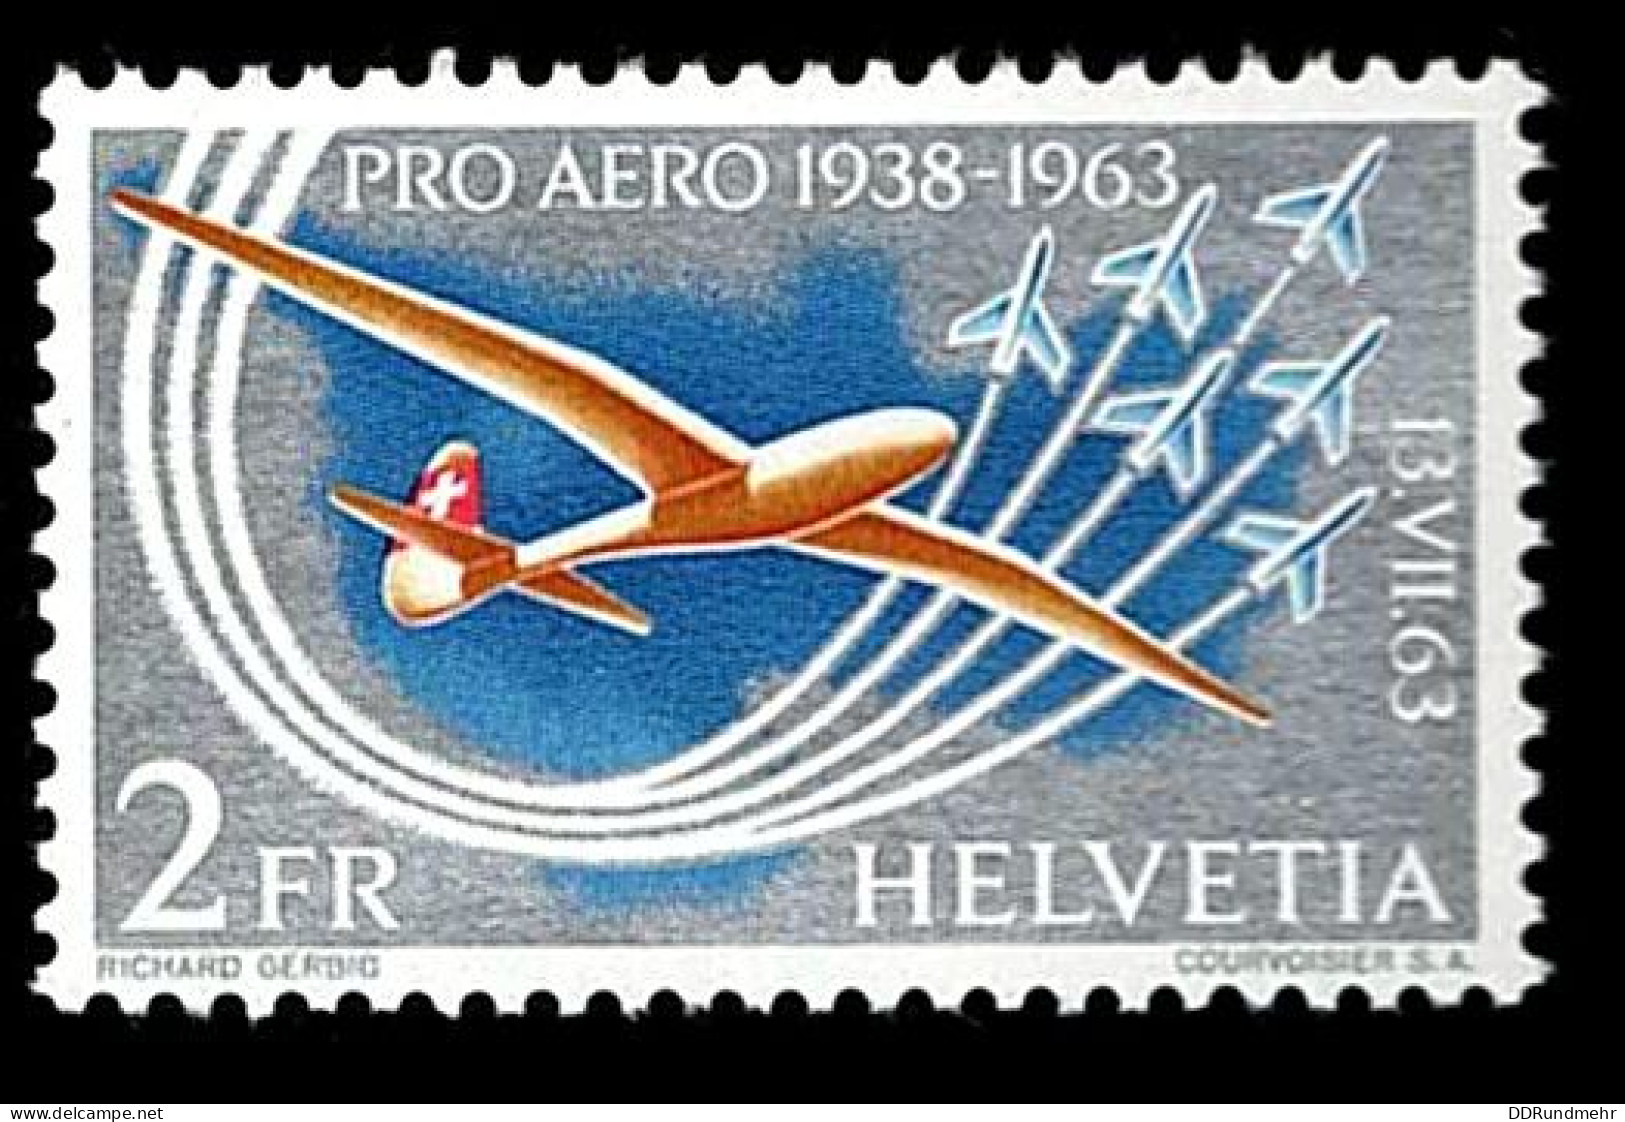 1963 Pro Aero  Michel CH 780 Stamp Number CH C46 Yvert Et Tellier CH PA45 Stanley Gibbons CH 681 Unificato CH A45 Xx MNH - Nuevos